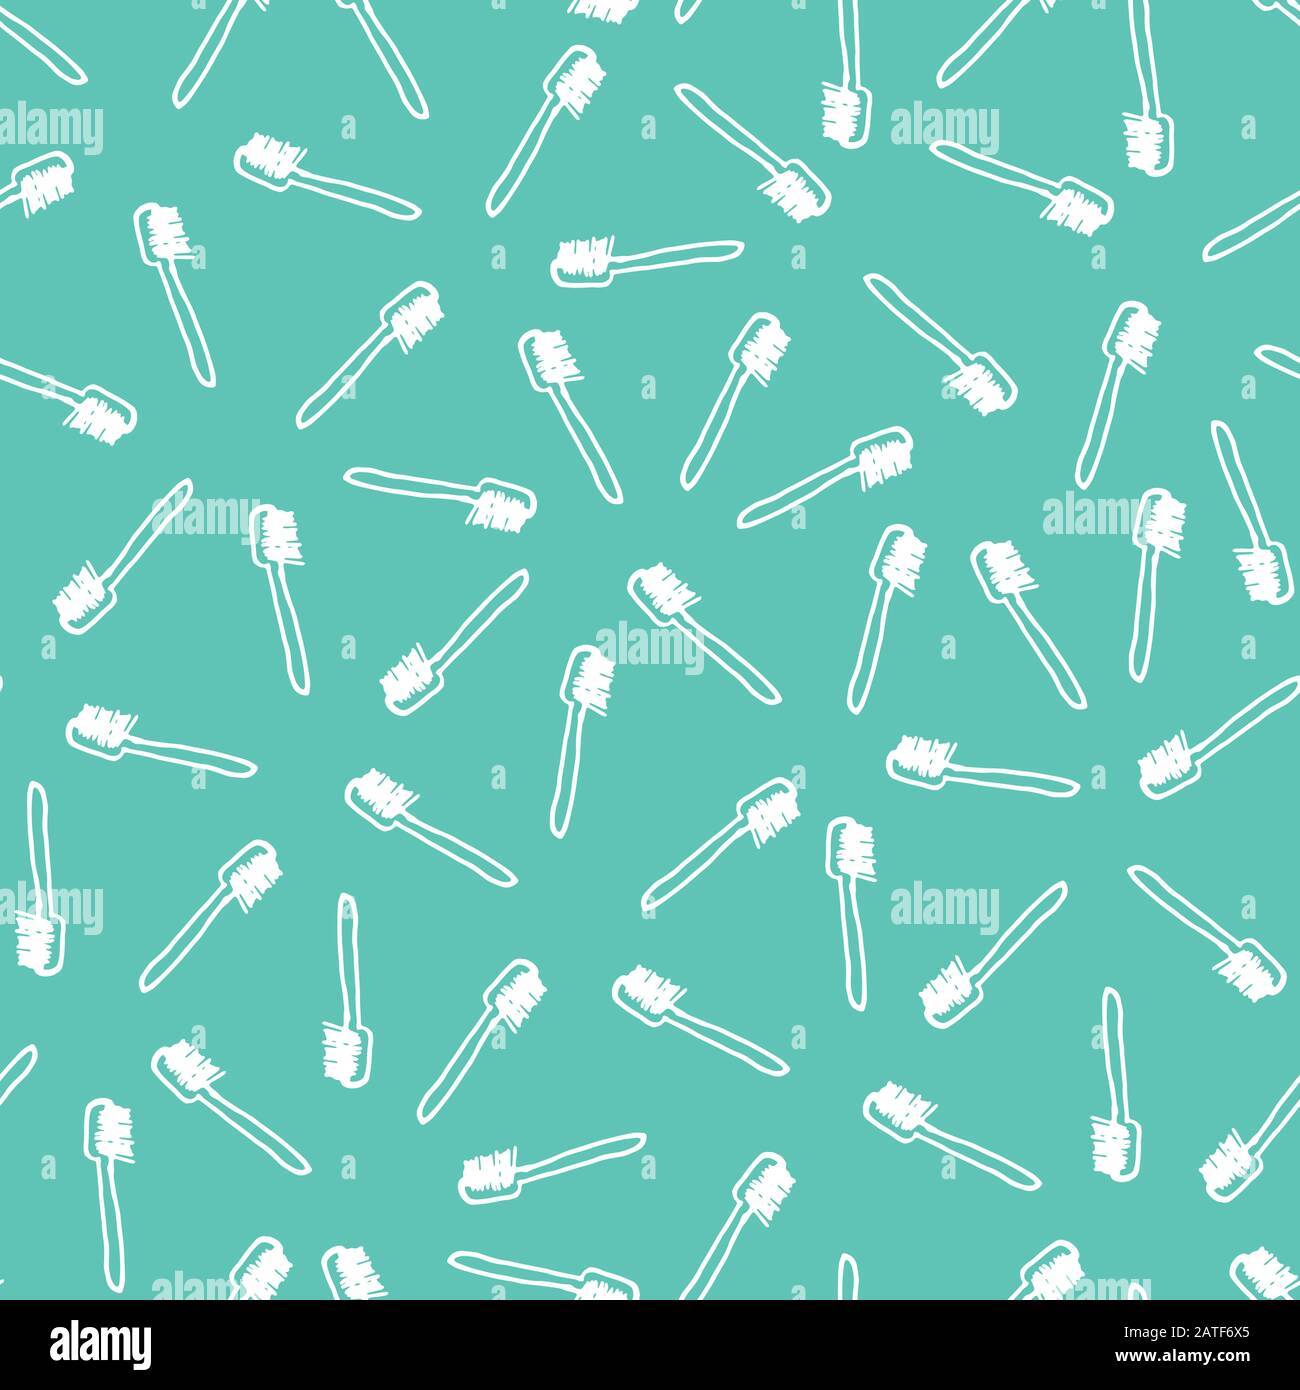 Vector green toothbrush simple monochrome repeat pattern. Perfect for fabric, scrapbooking and wallpaper projects. Stock Vector